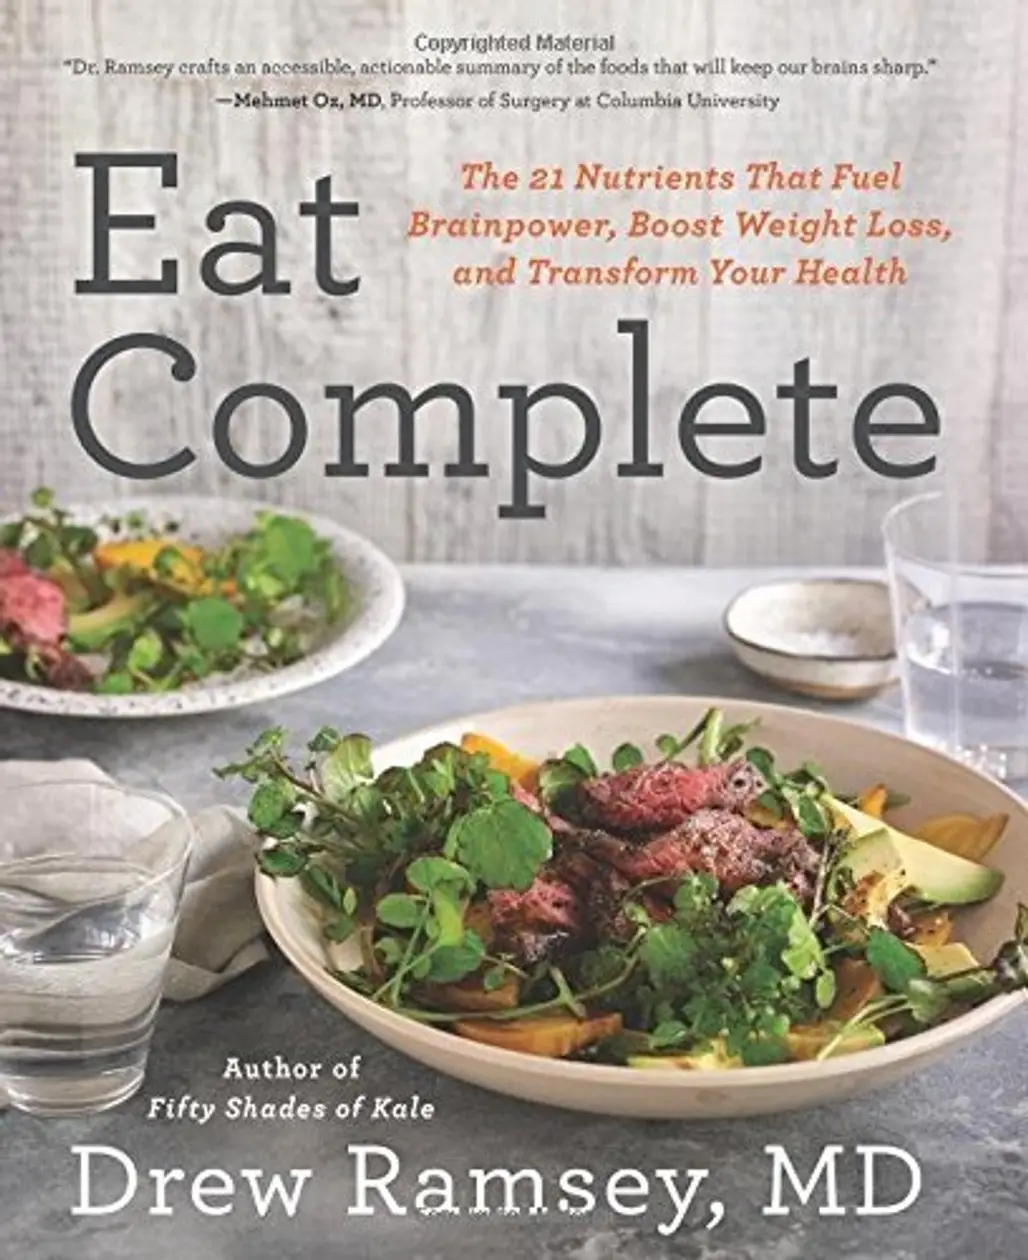 Eat Complete by Drew Ramsey